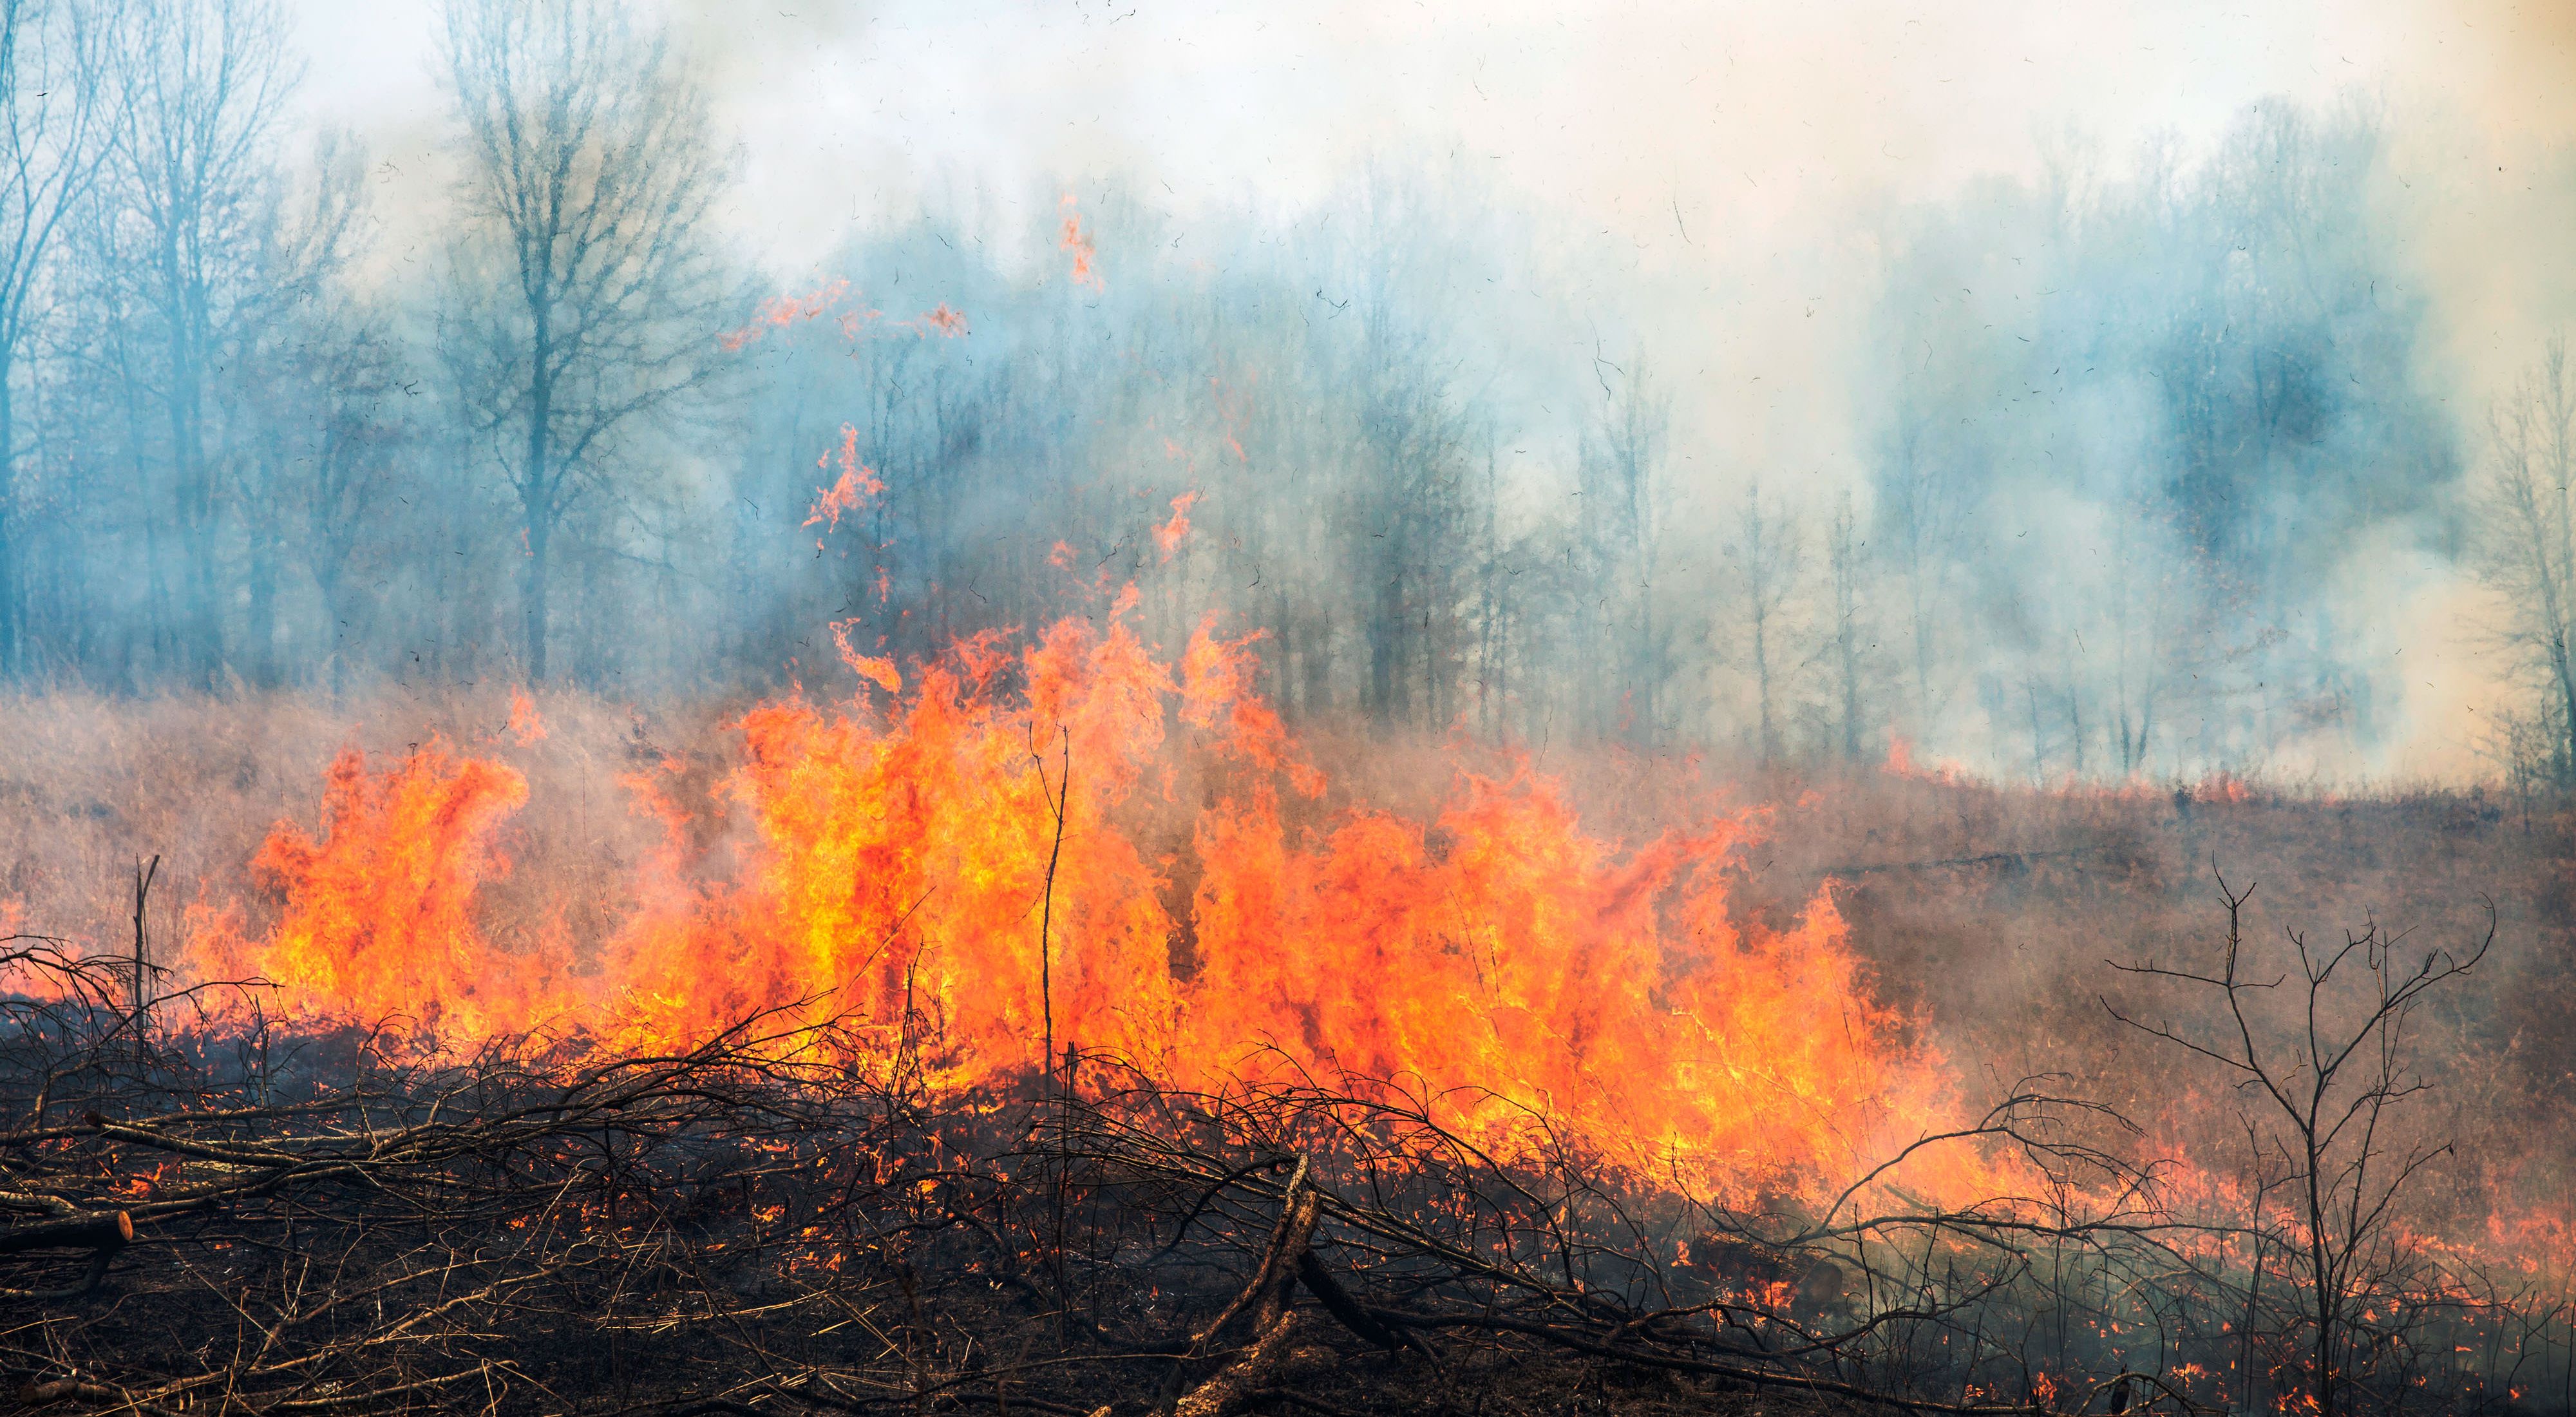 A controlled burn on a grassy area.